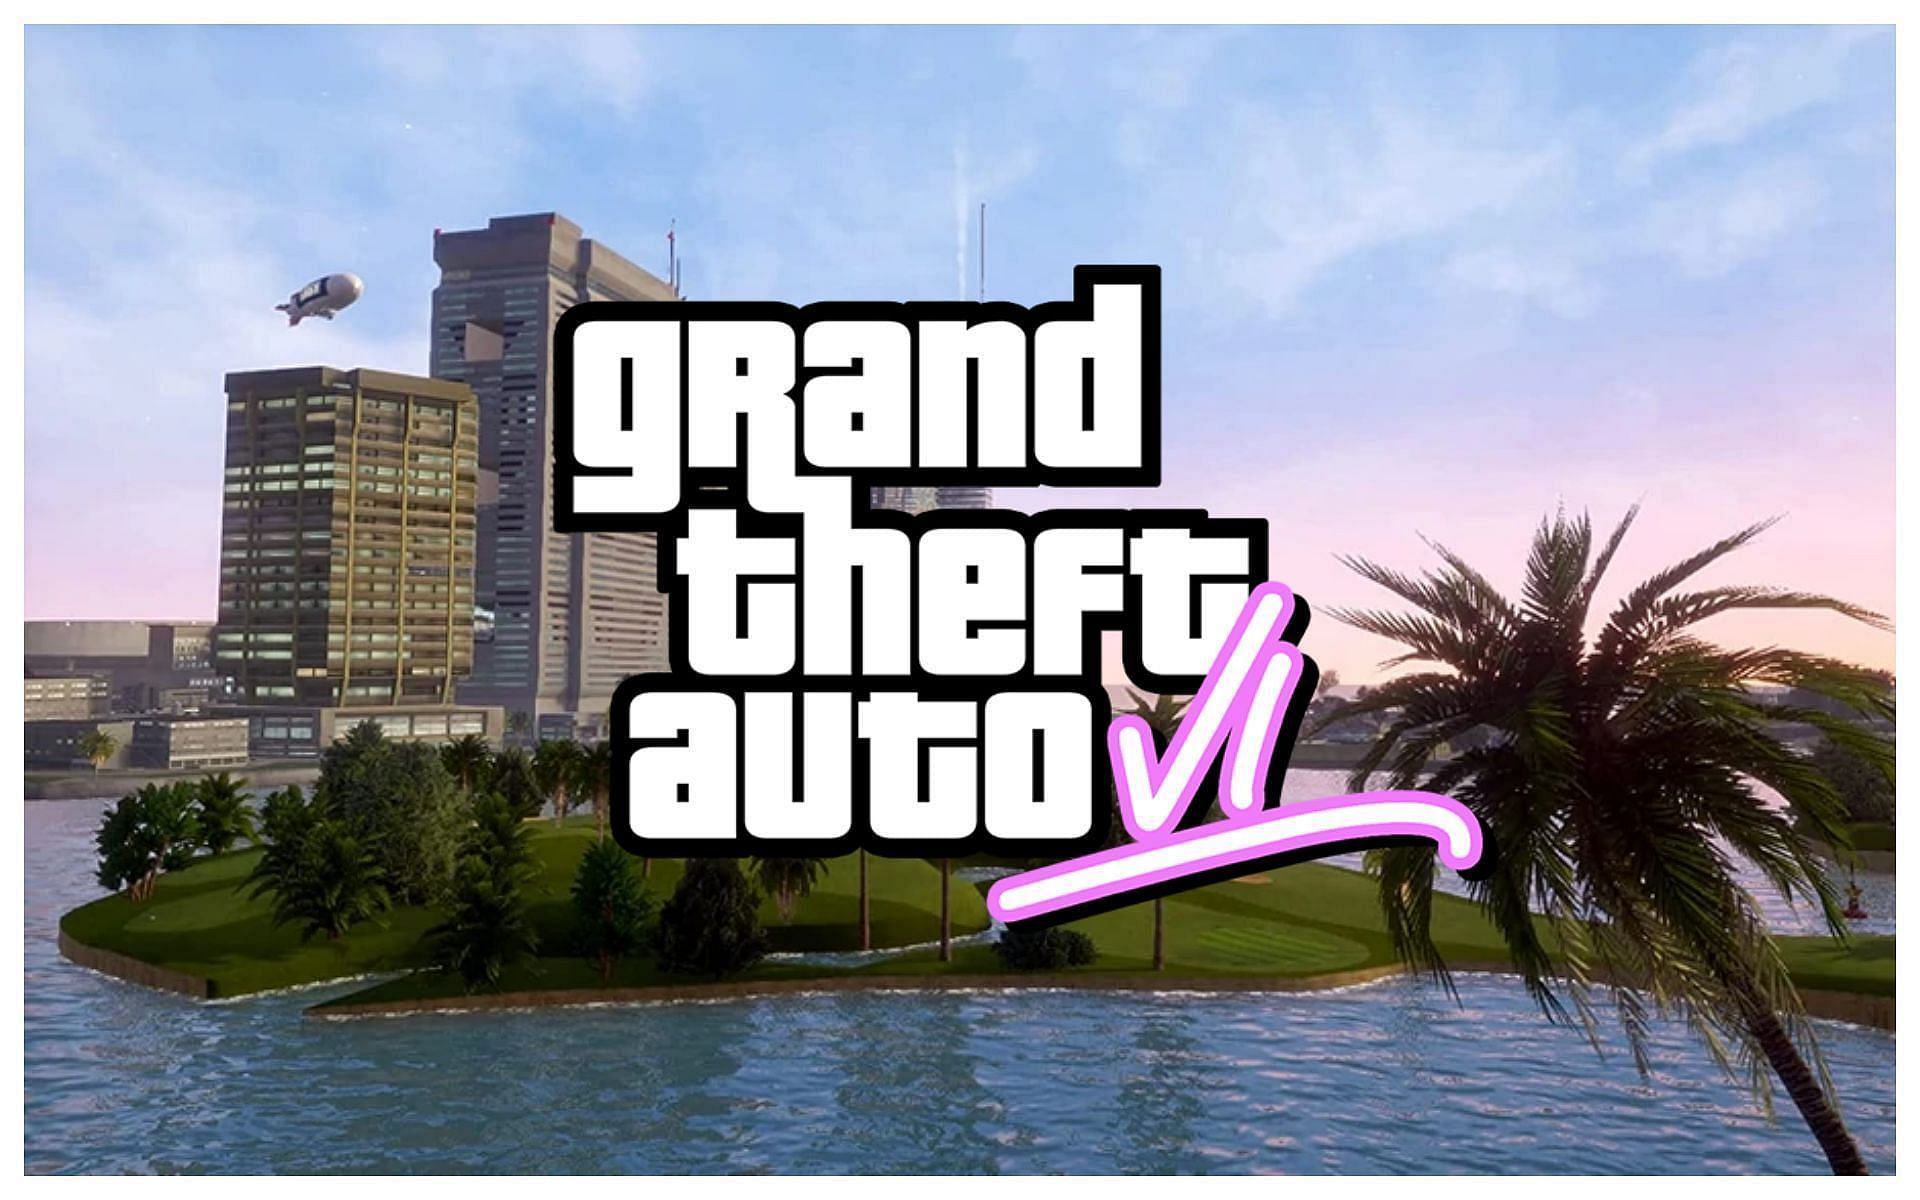 Both protagonists live in Vice City (Image via Rockstar Games)